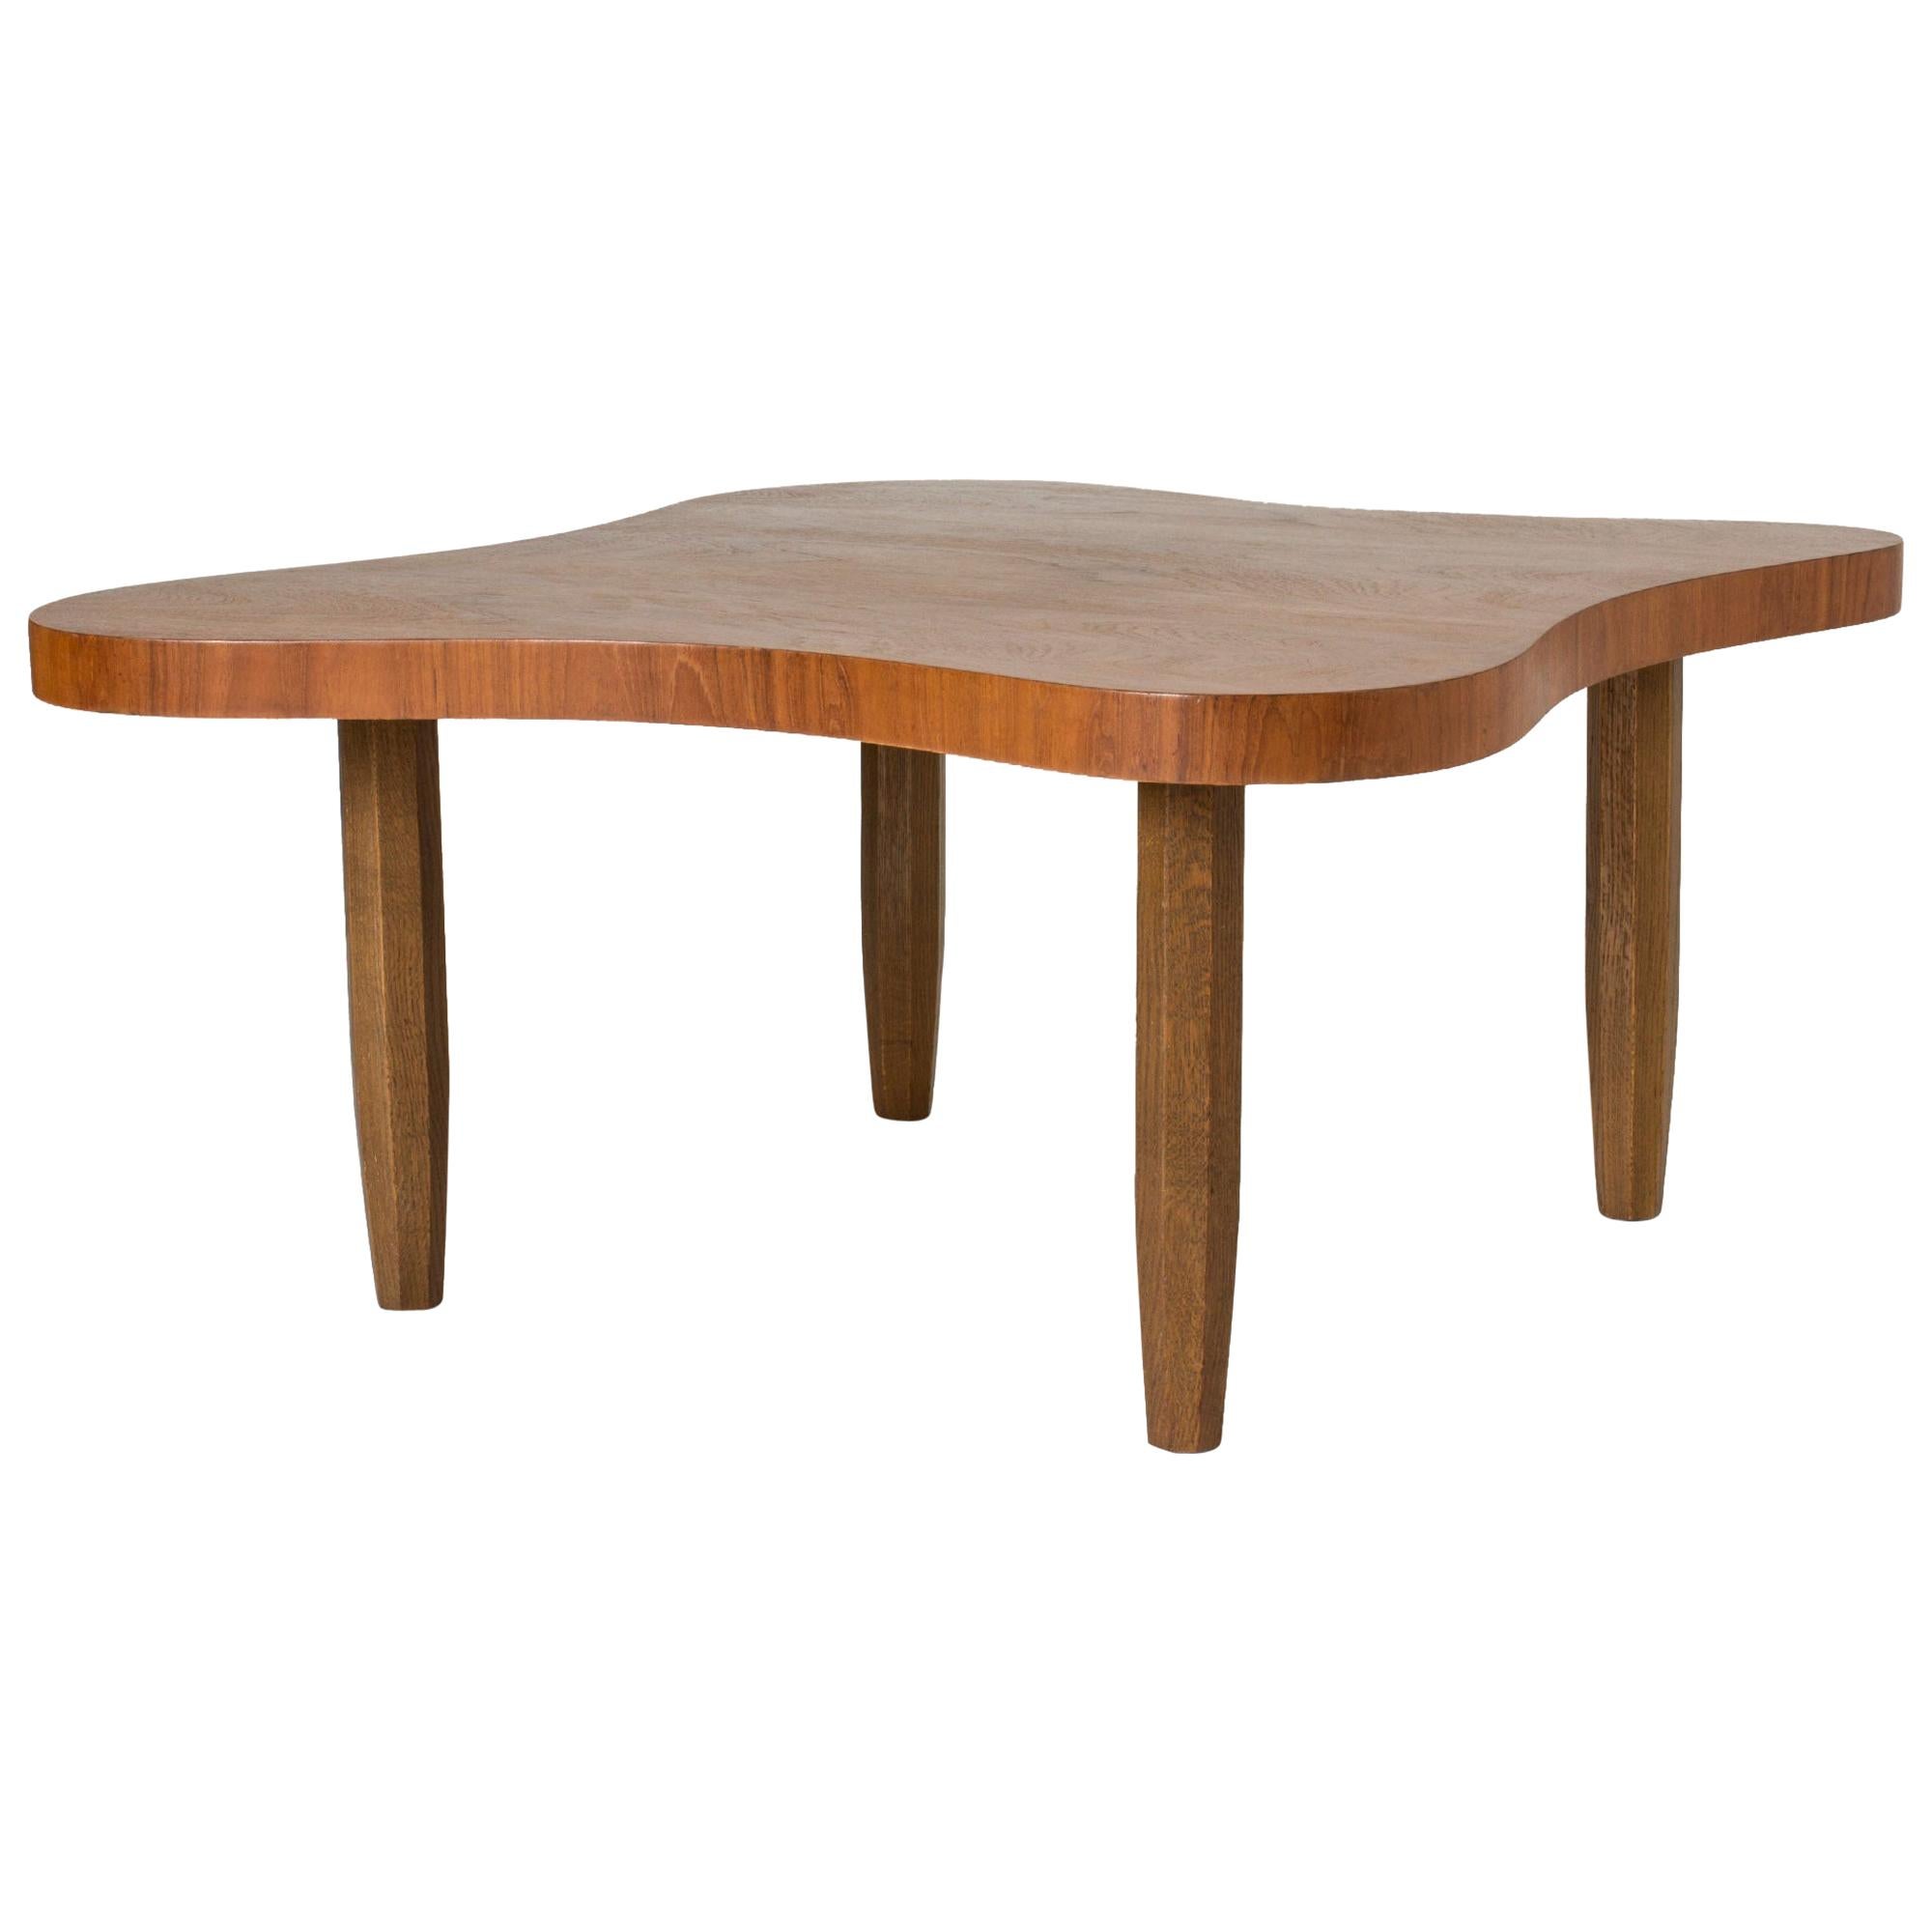 Swedish Midcentury Coffee Table by Sten Blomberg for Meeth, Sweden, 1942 For Sale